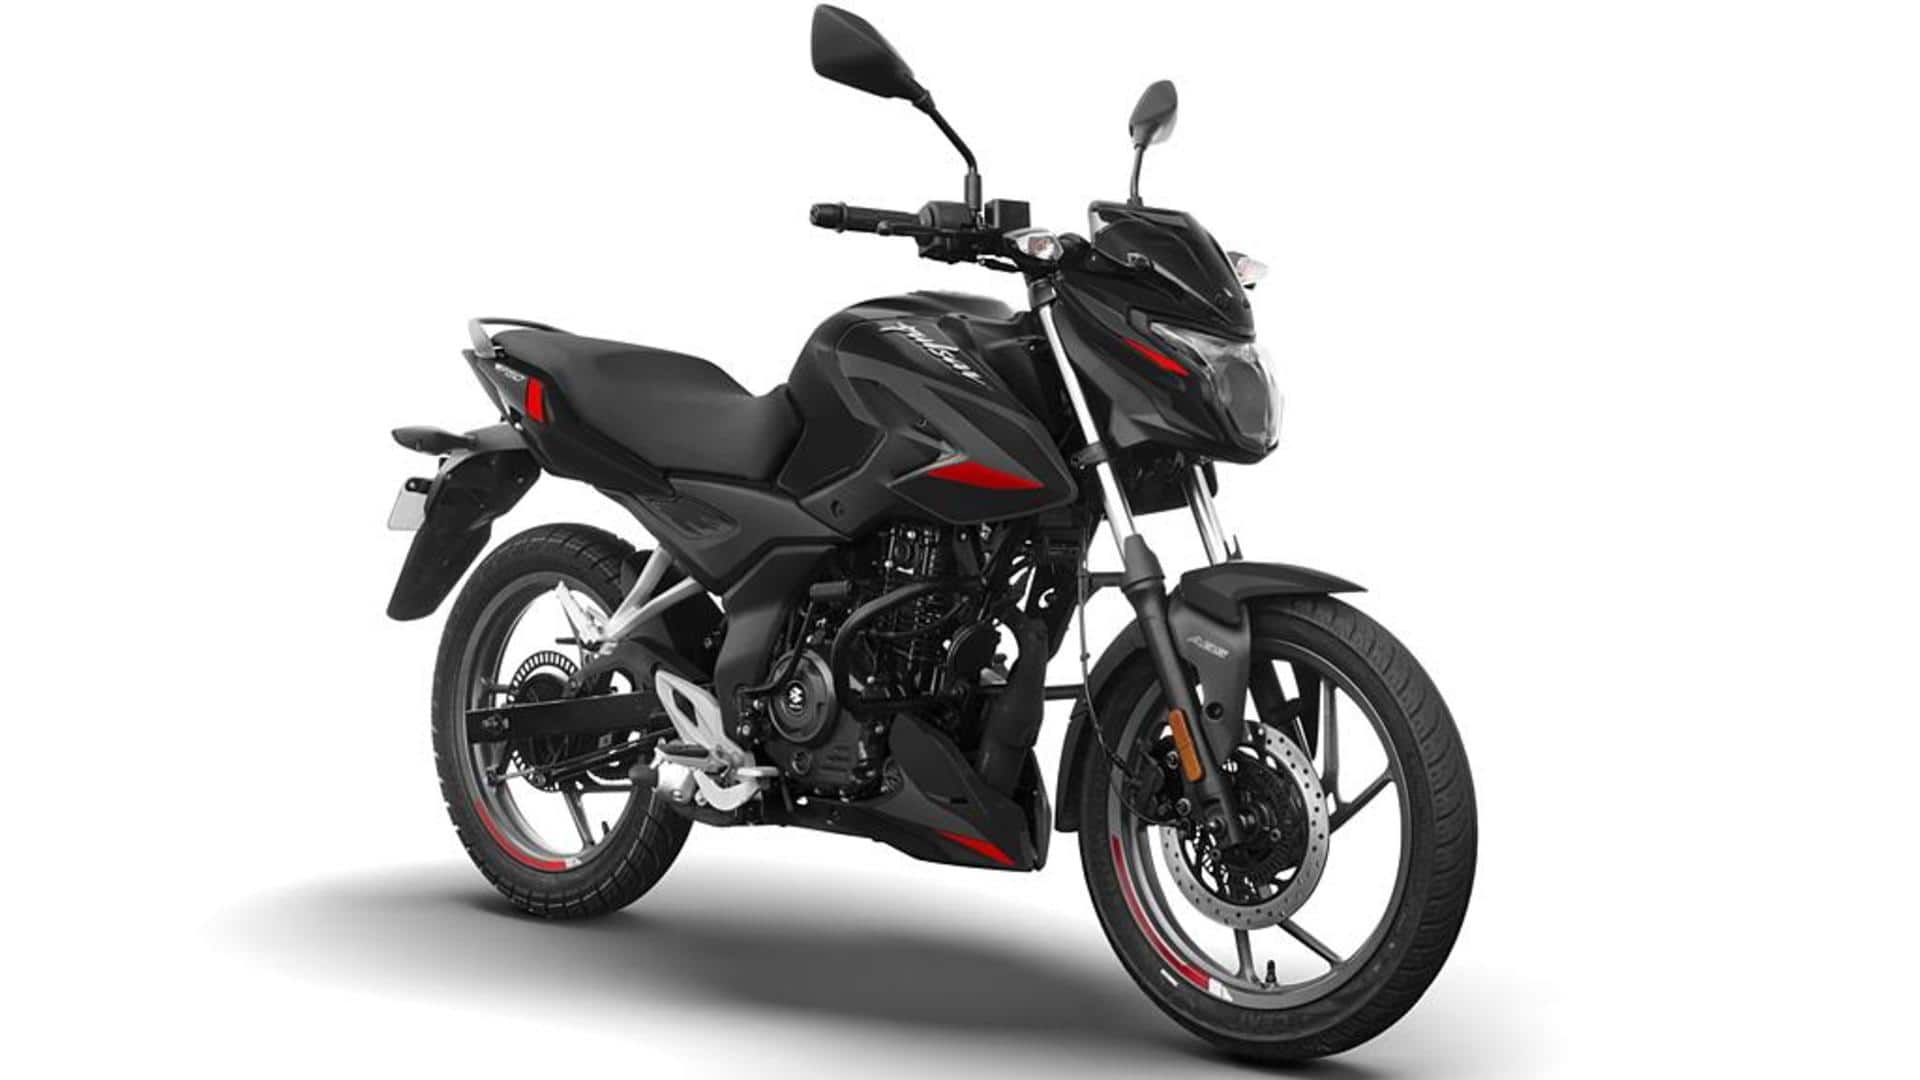 Bajaj Pulsar P150 launched at Rs. 1.17 lakh: Check features